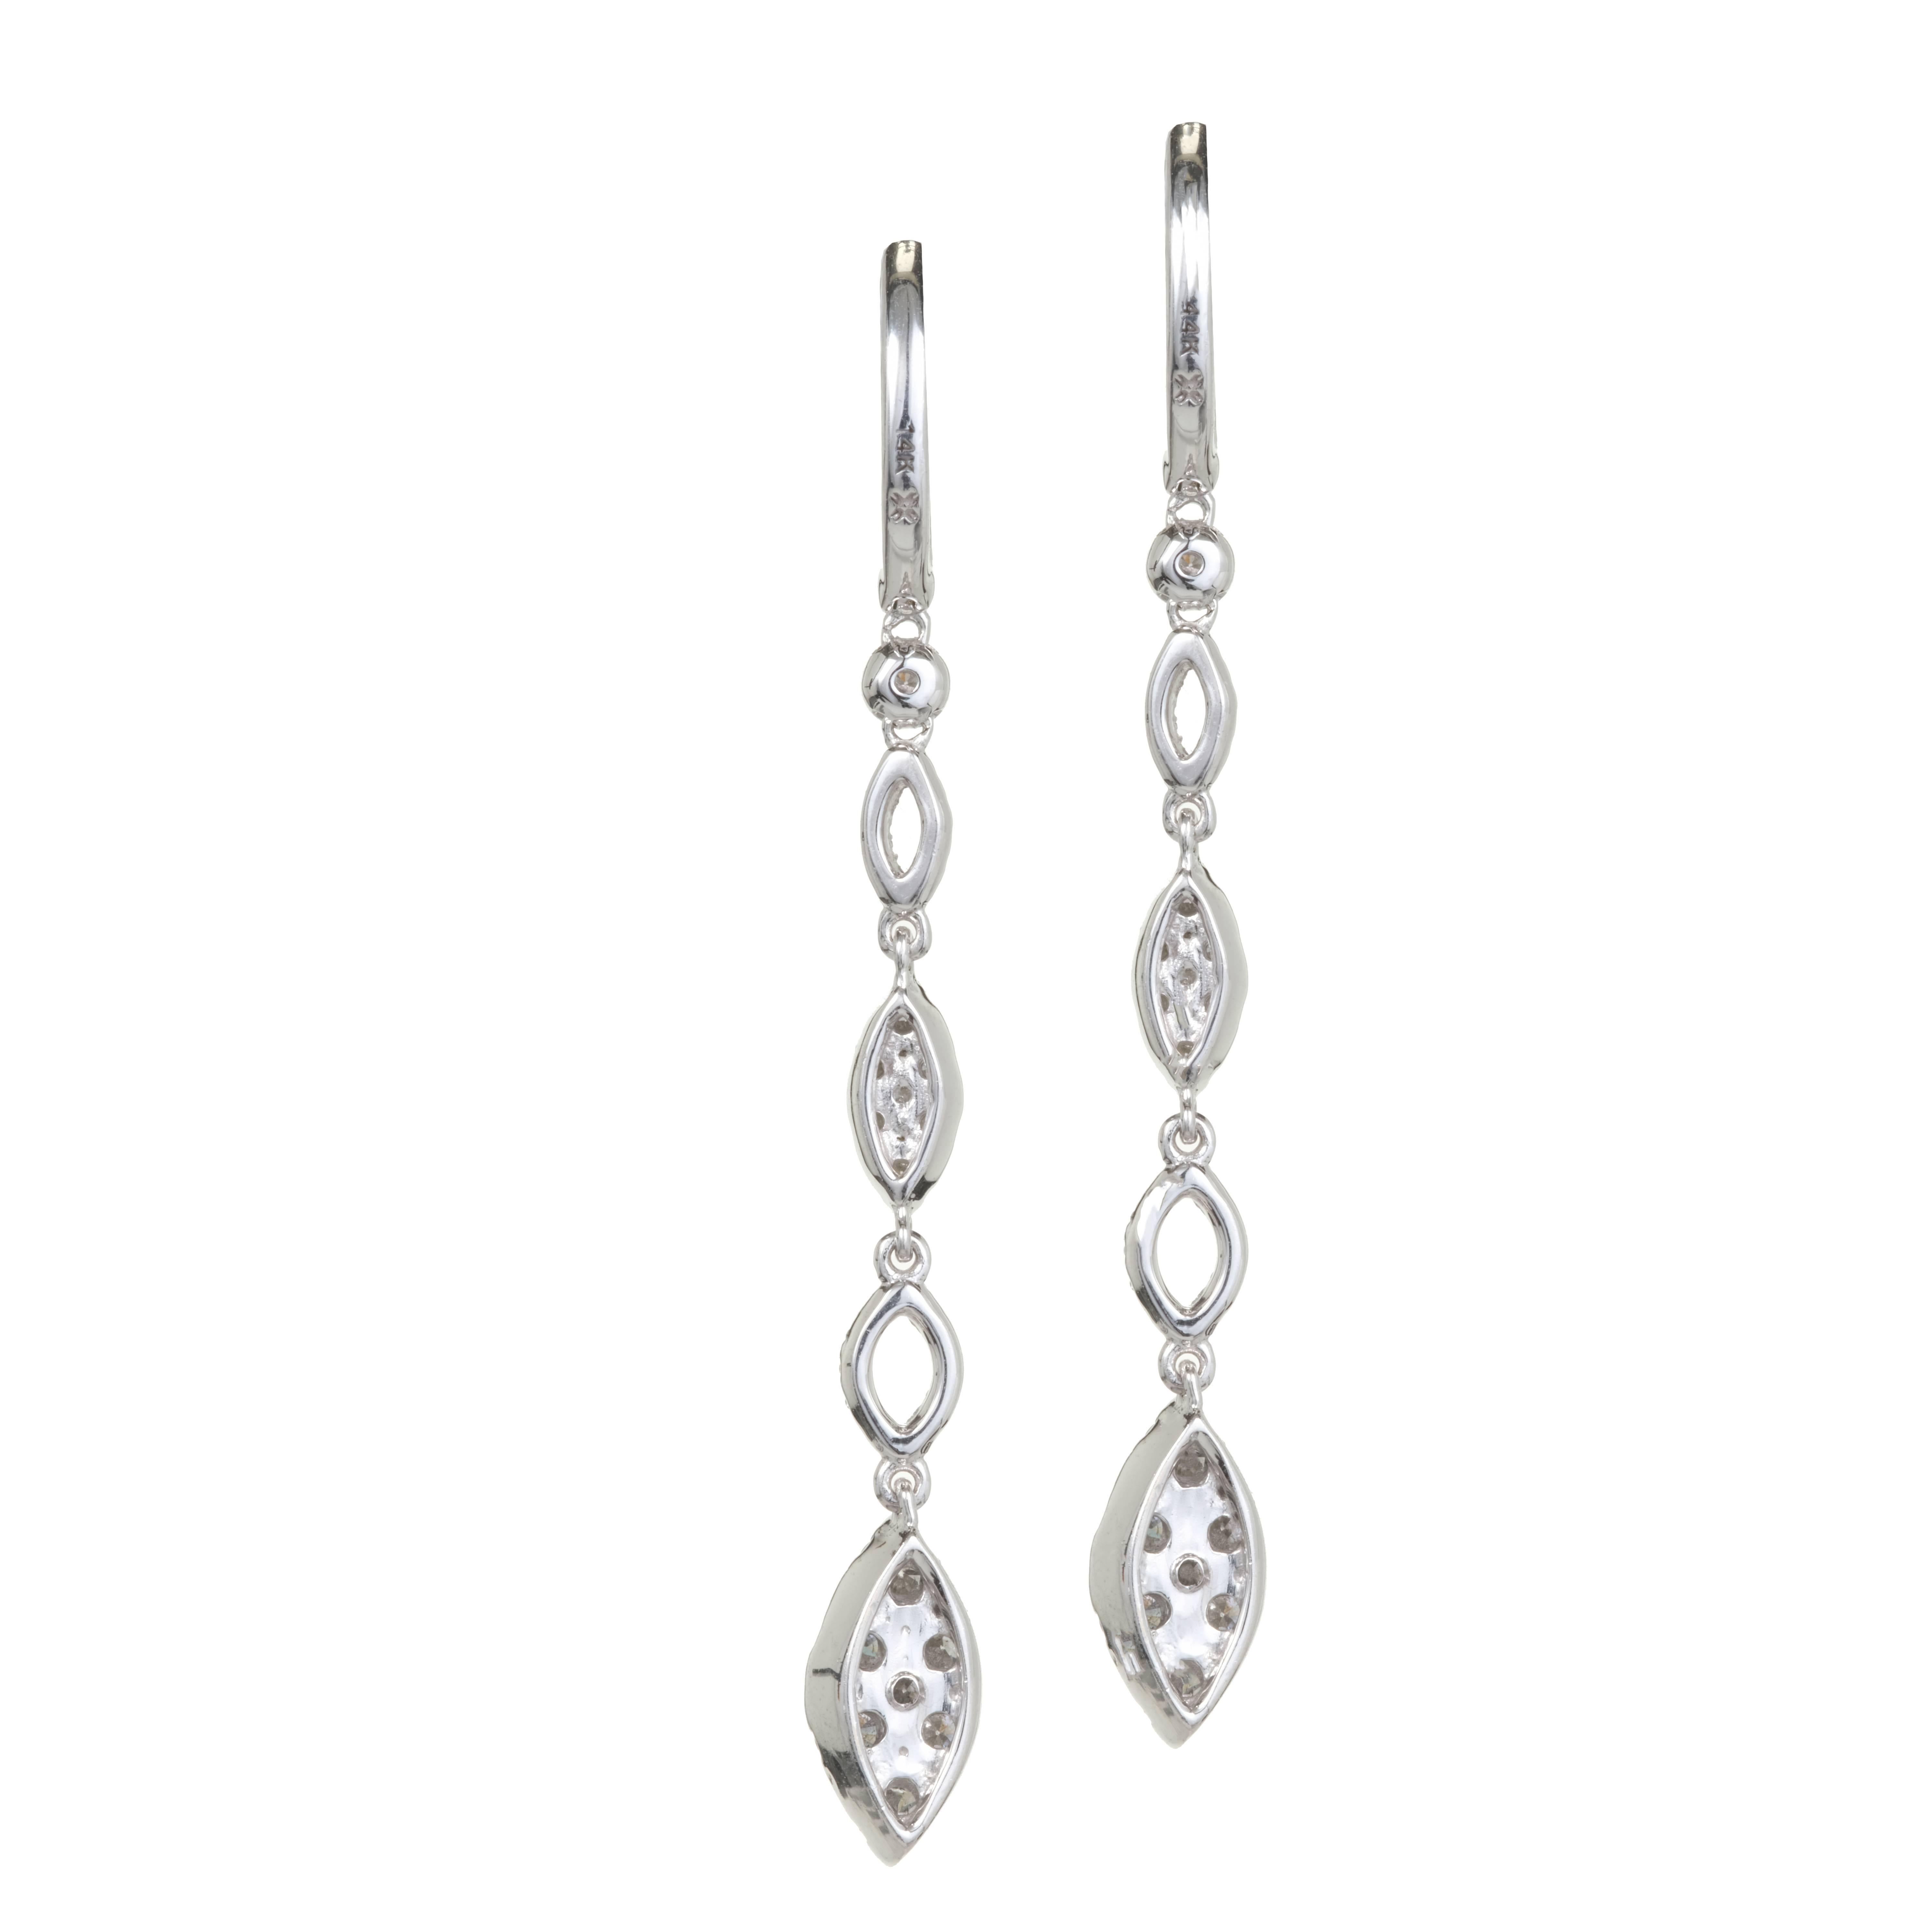 Bright sparkly full cut Diamond dangle drop earrings with hoop tops and 4 dangle sections in 14k white gold.

130 full cut Diamonds, approx. total weight 1.50cts, G, VS2 – SI1
14k white gold
Tested: 14k
4.3 grams
Top to bottom: 50.99mm or 2